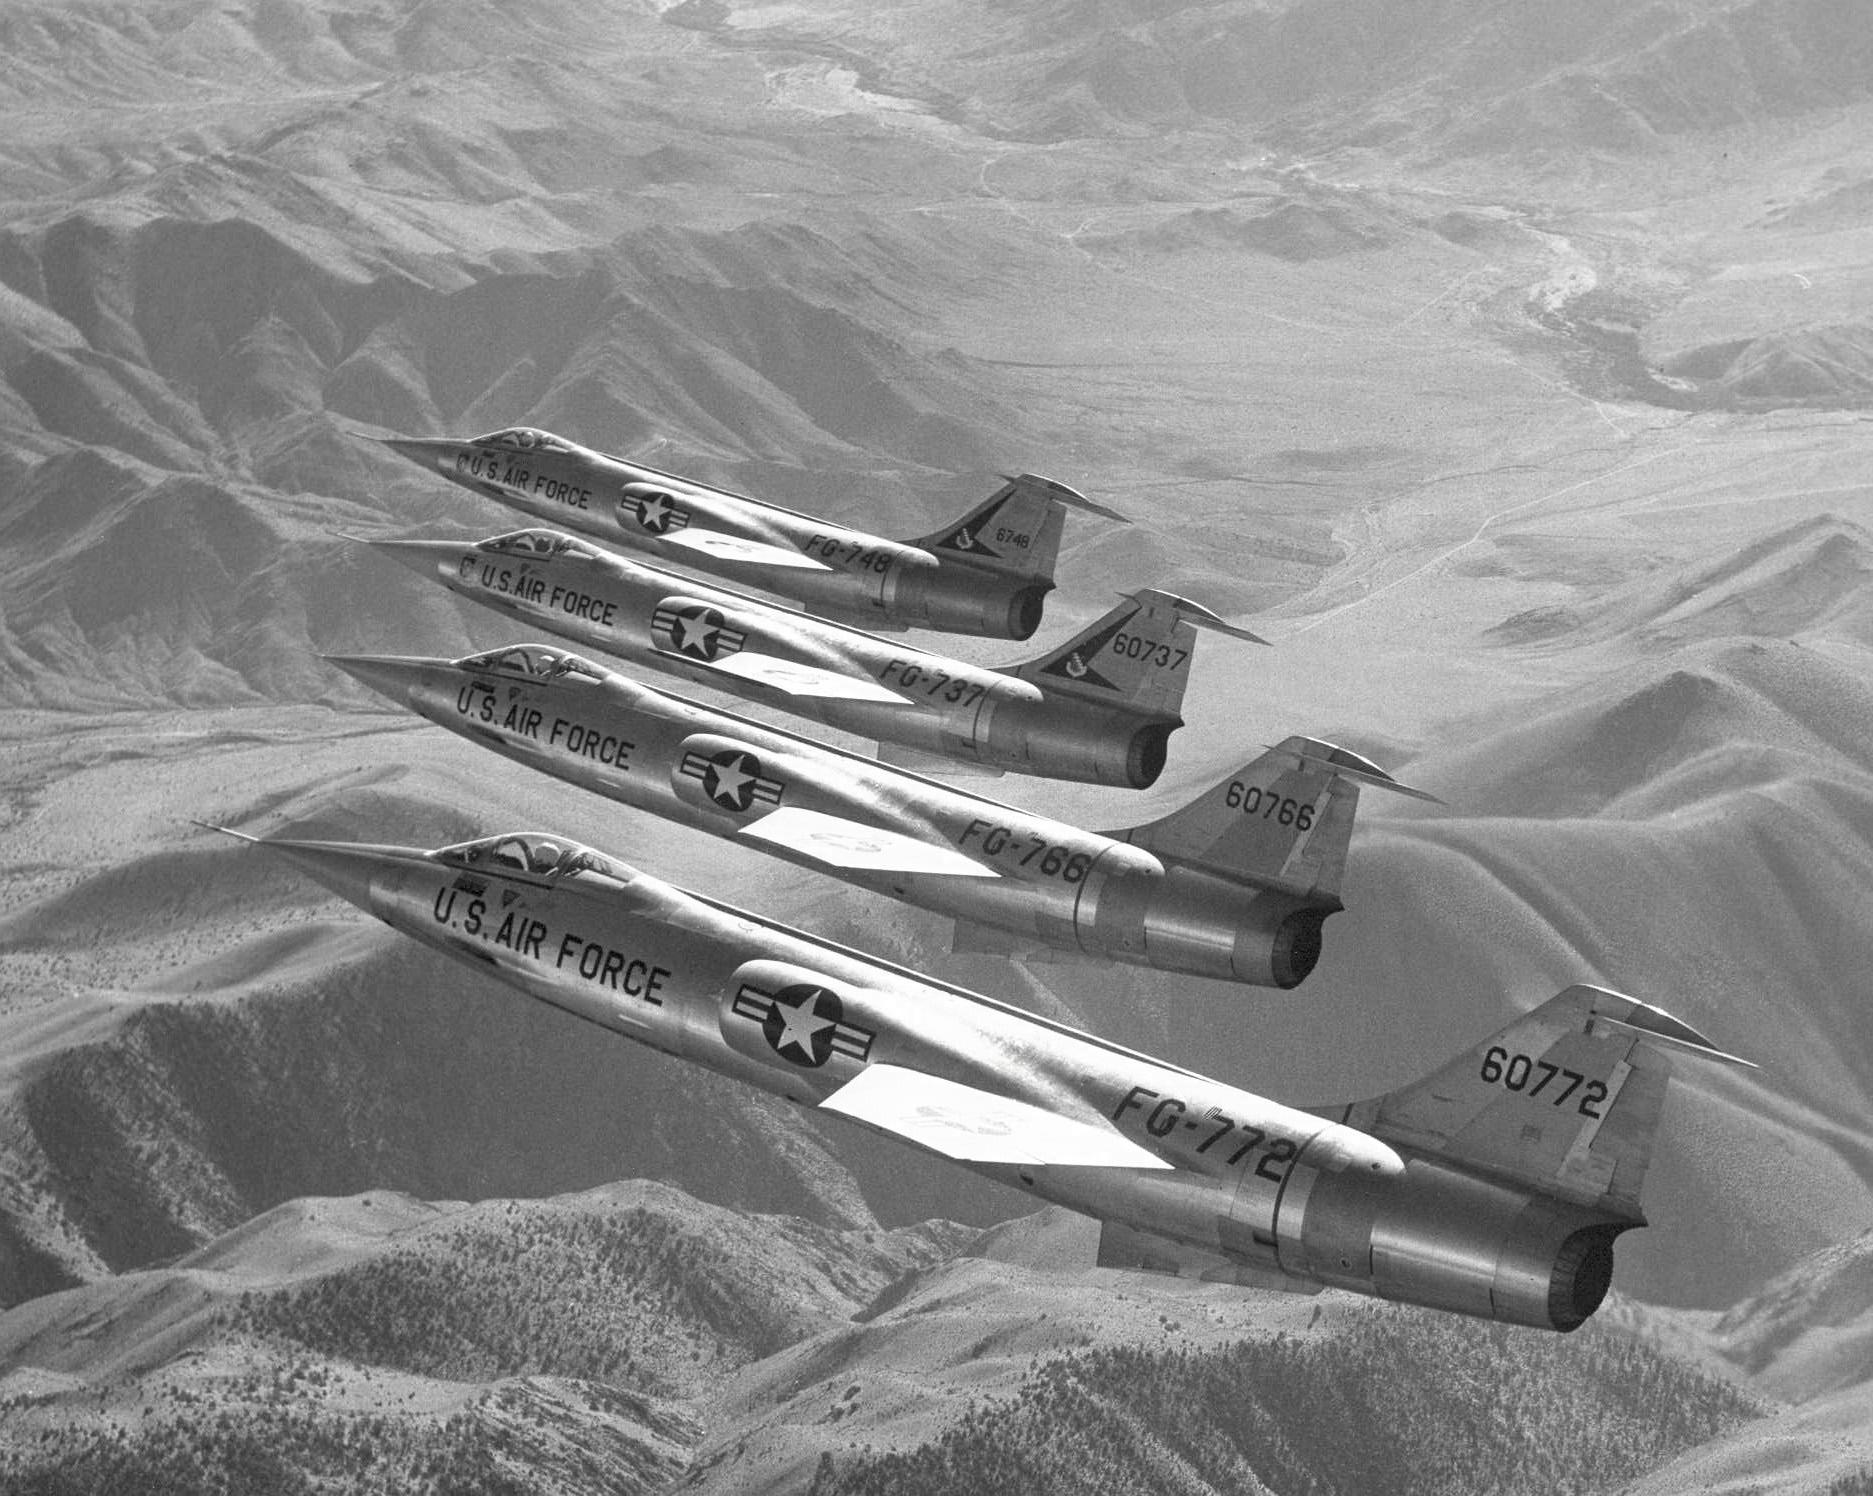 Lockheed F-104A-15-LO Starfighter 56-0772 is the interceptor closest to the camera in this photograph. (U.S. Air Force)